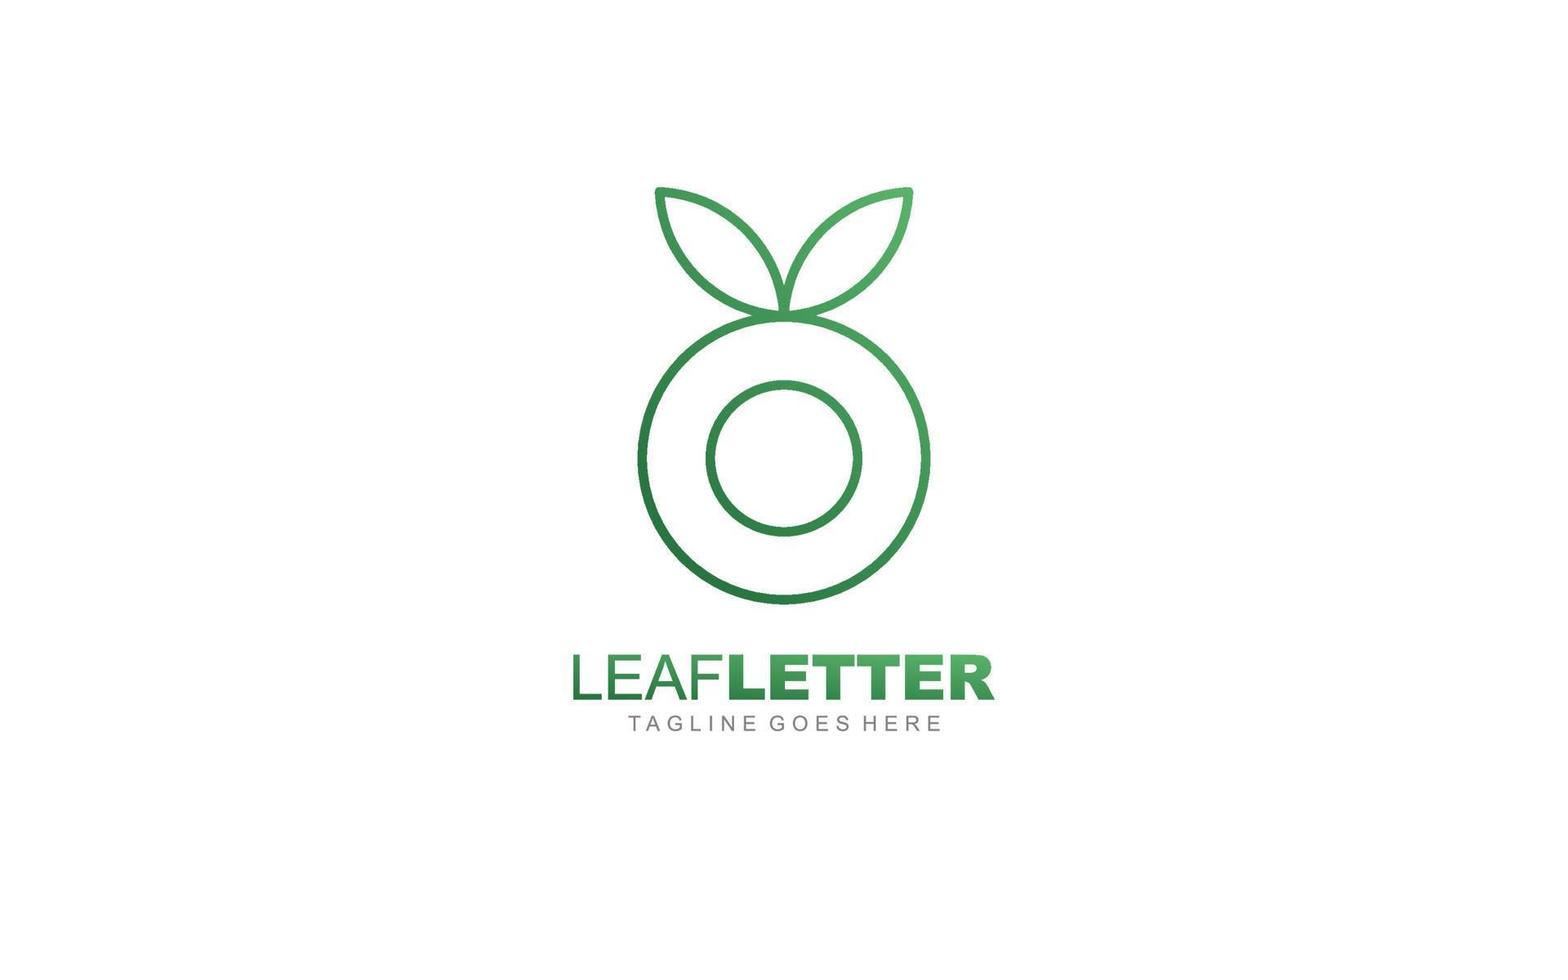 O logo leaf for identity. nature template vector illustration for your brand.